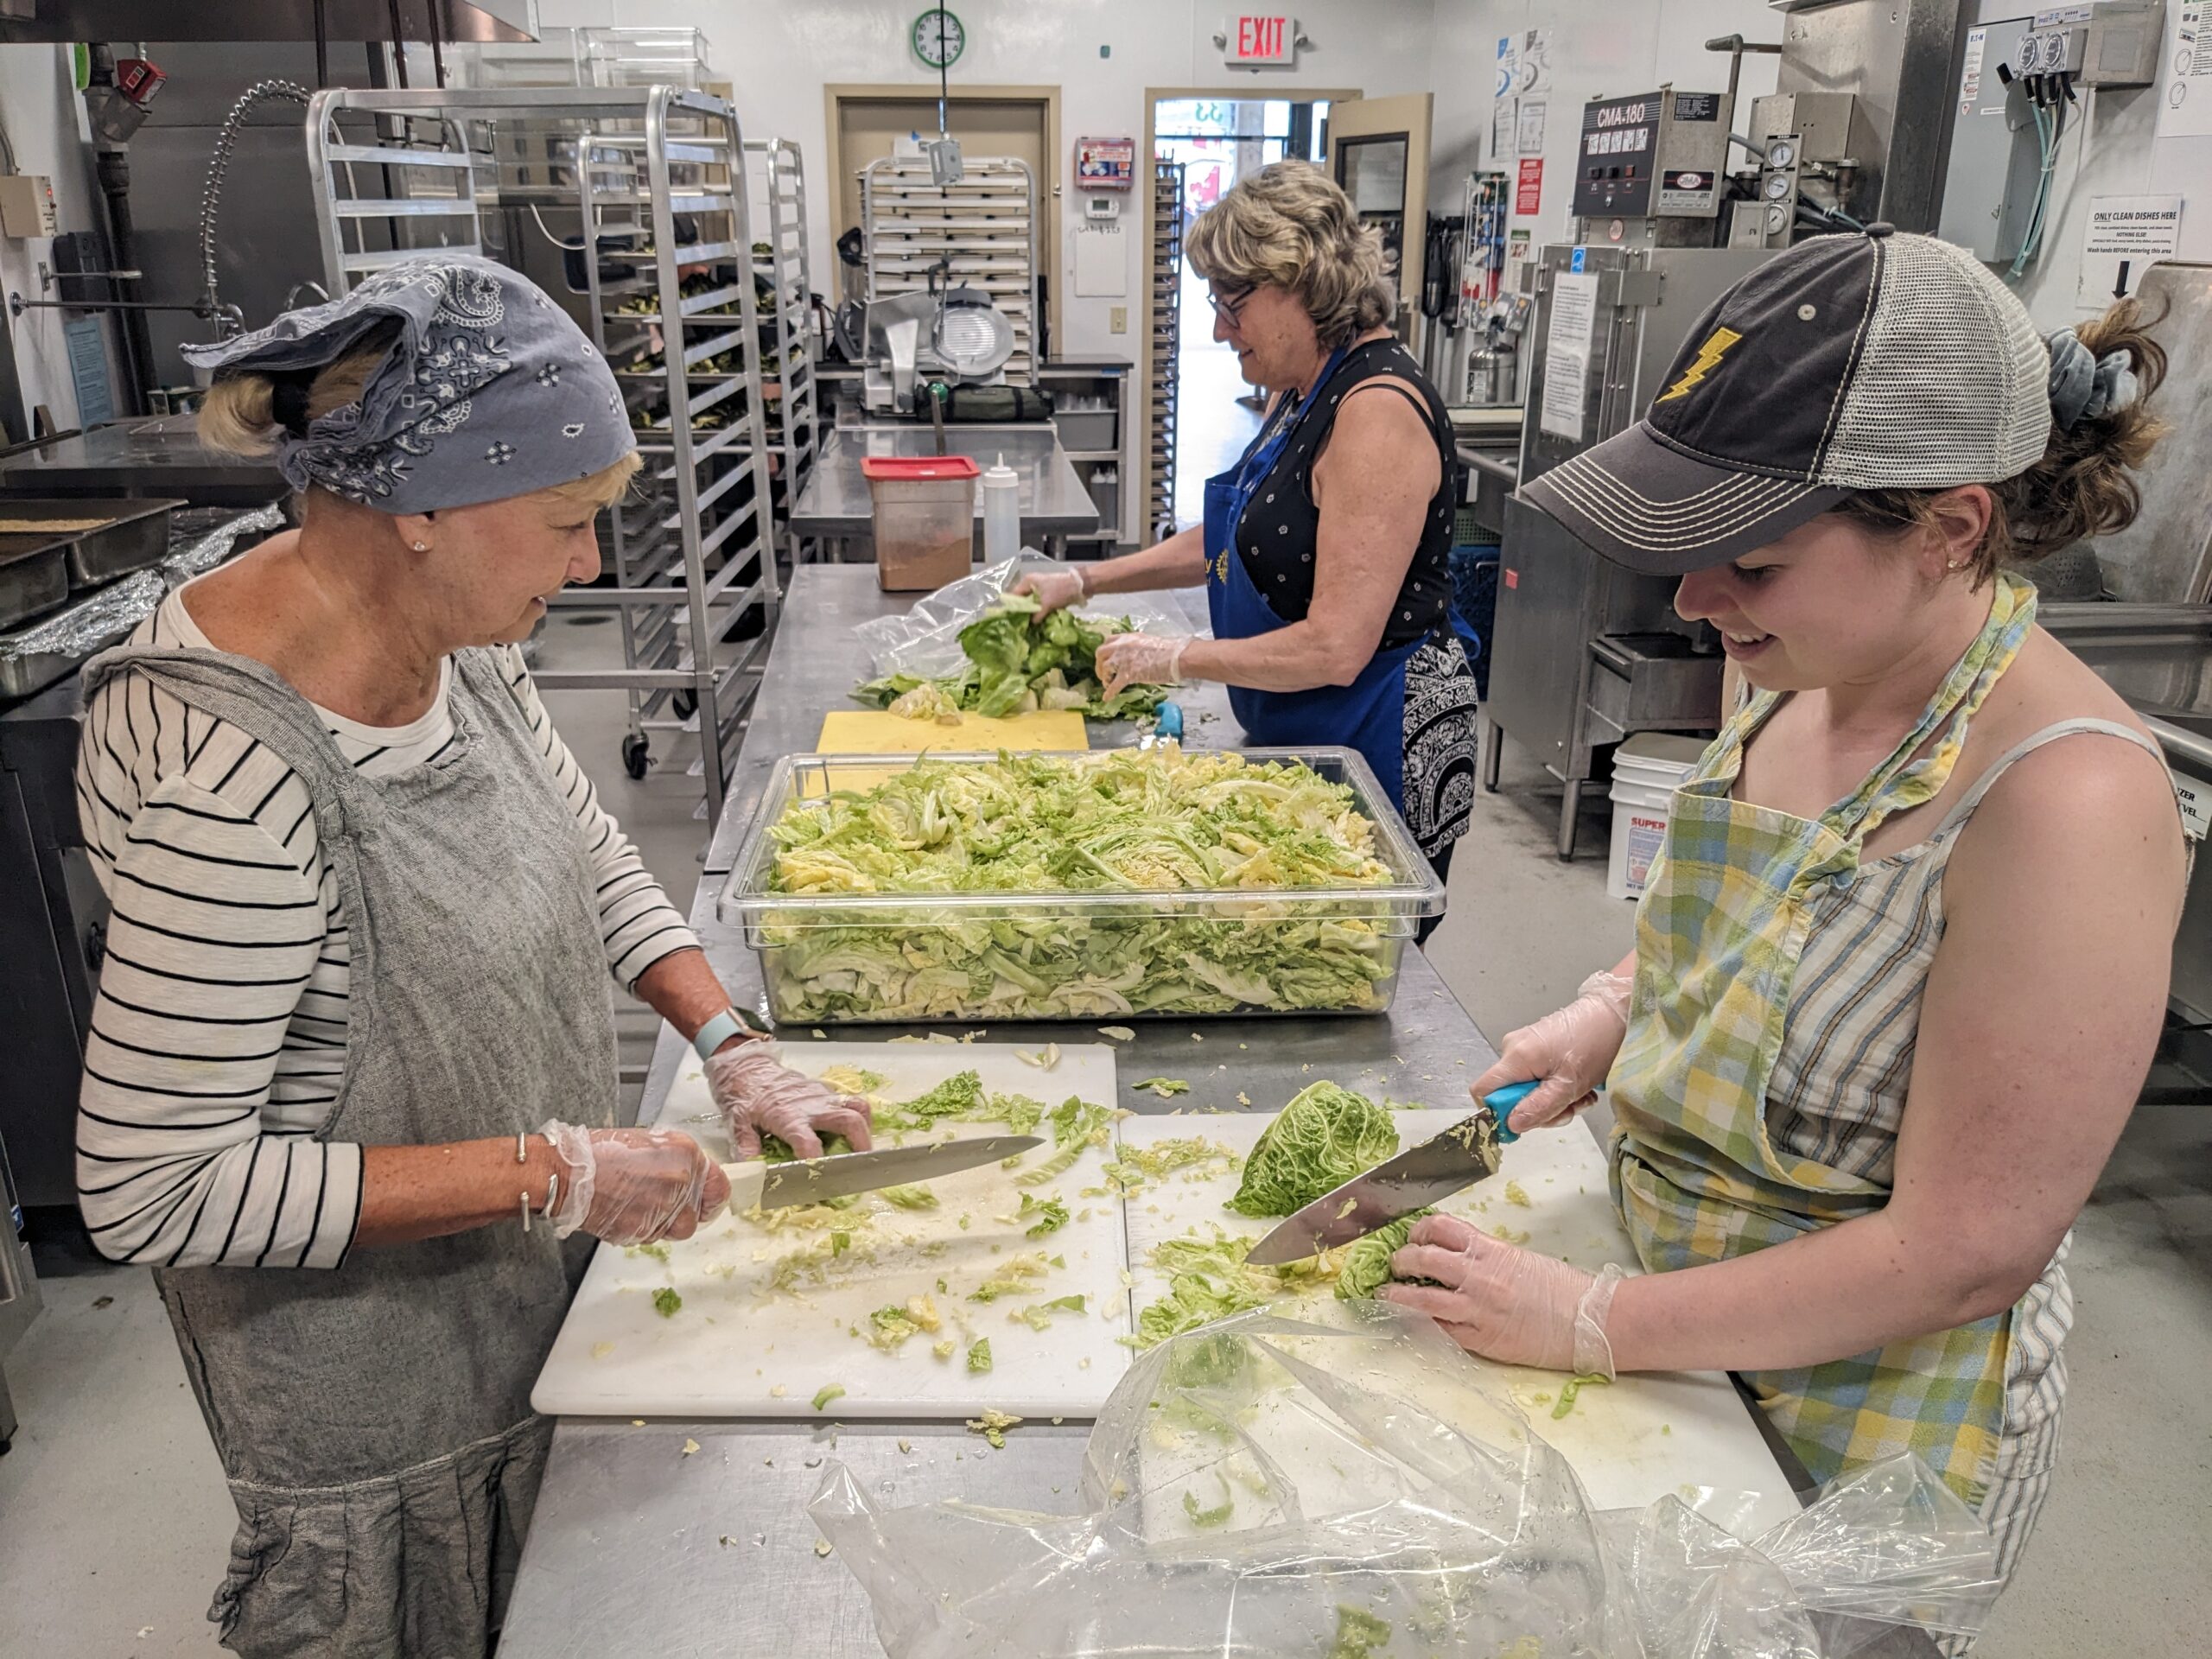 Volunteers chopping lettuce for prepared meals at Open Table